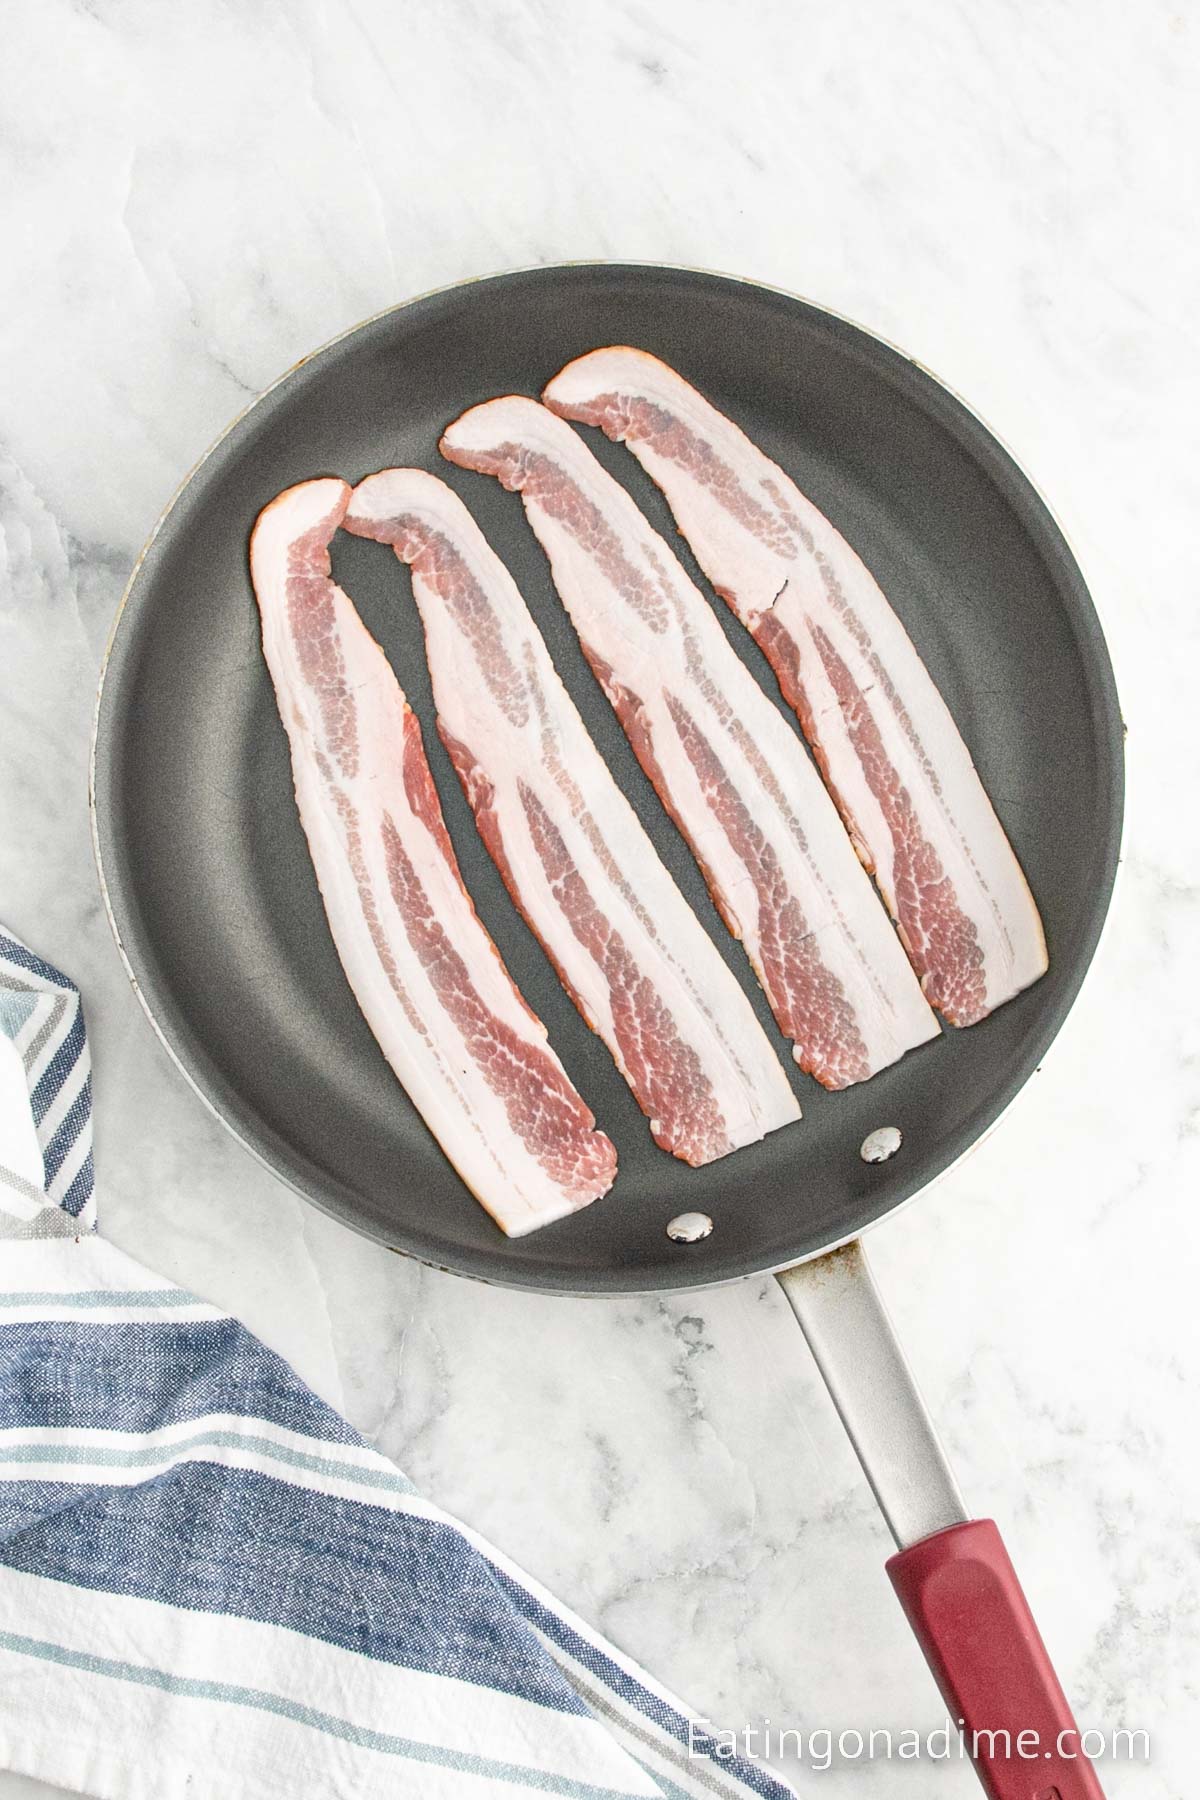 Cooking bacon in a skillet